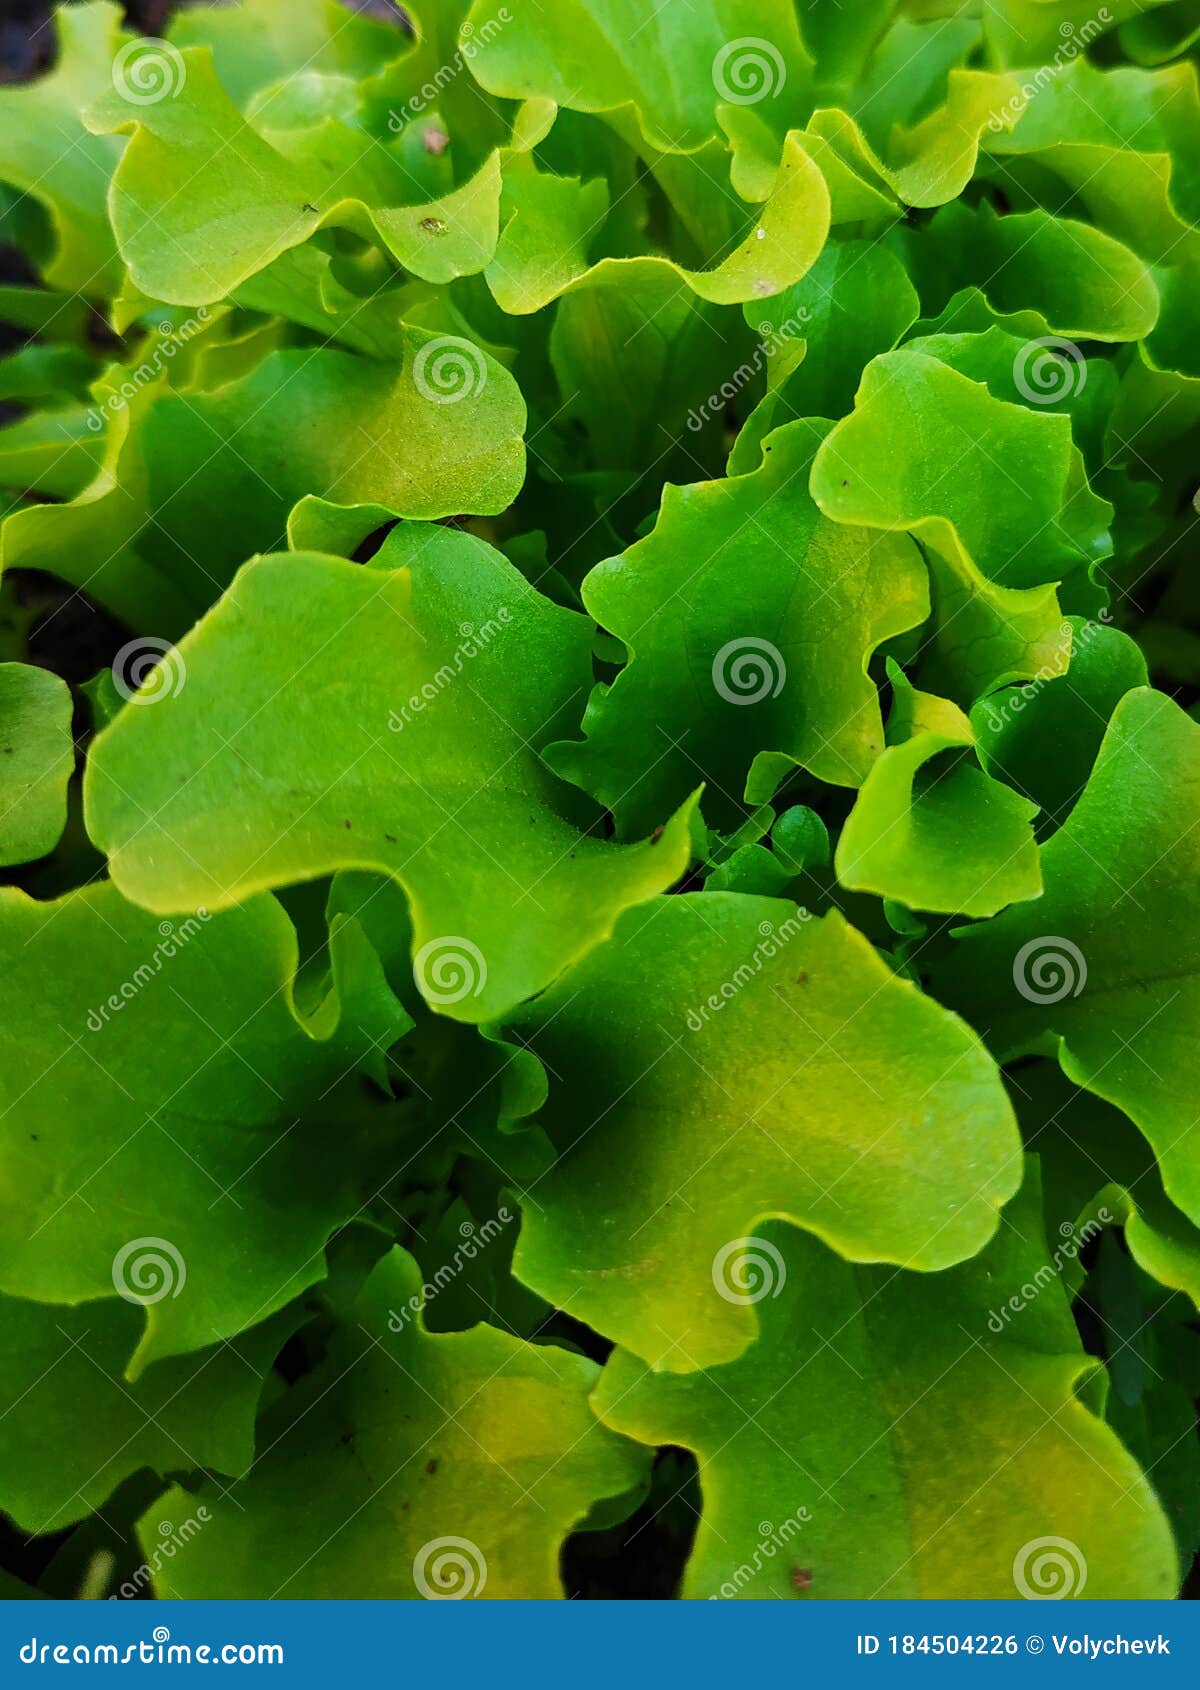 List 103+ Images what does lettuce look like when it sprouts Completed